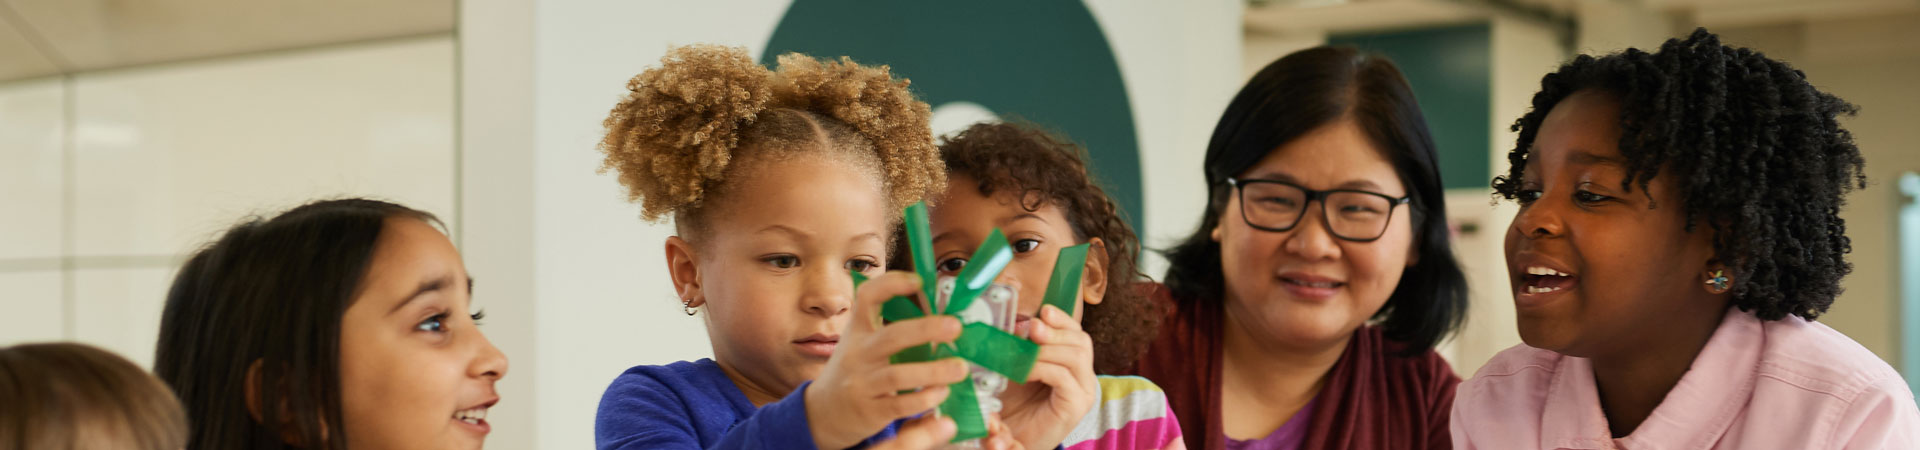  Four younger Girl Scouts are sitting at a table with an adult Girl Scout volunteer. There are sheets of paper on the table and they are working together to conduct  a science experiment using a plastic bottle. 